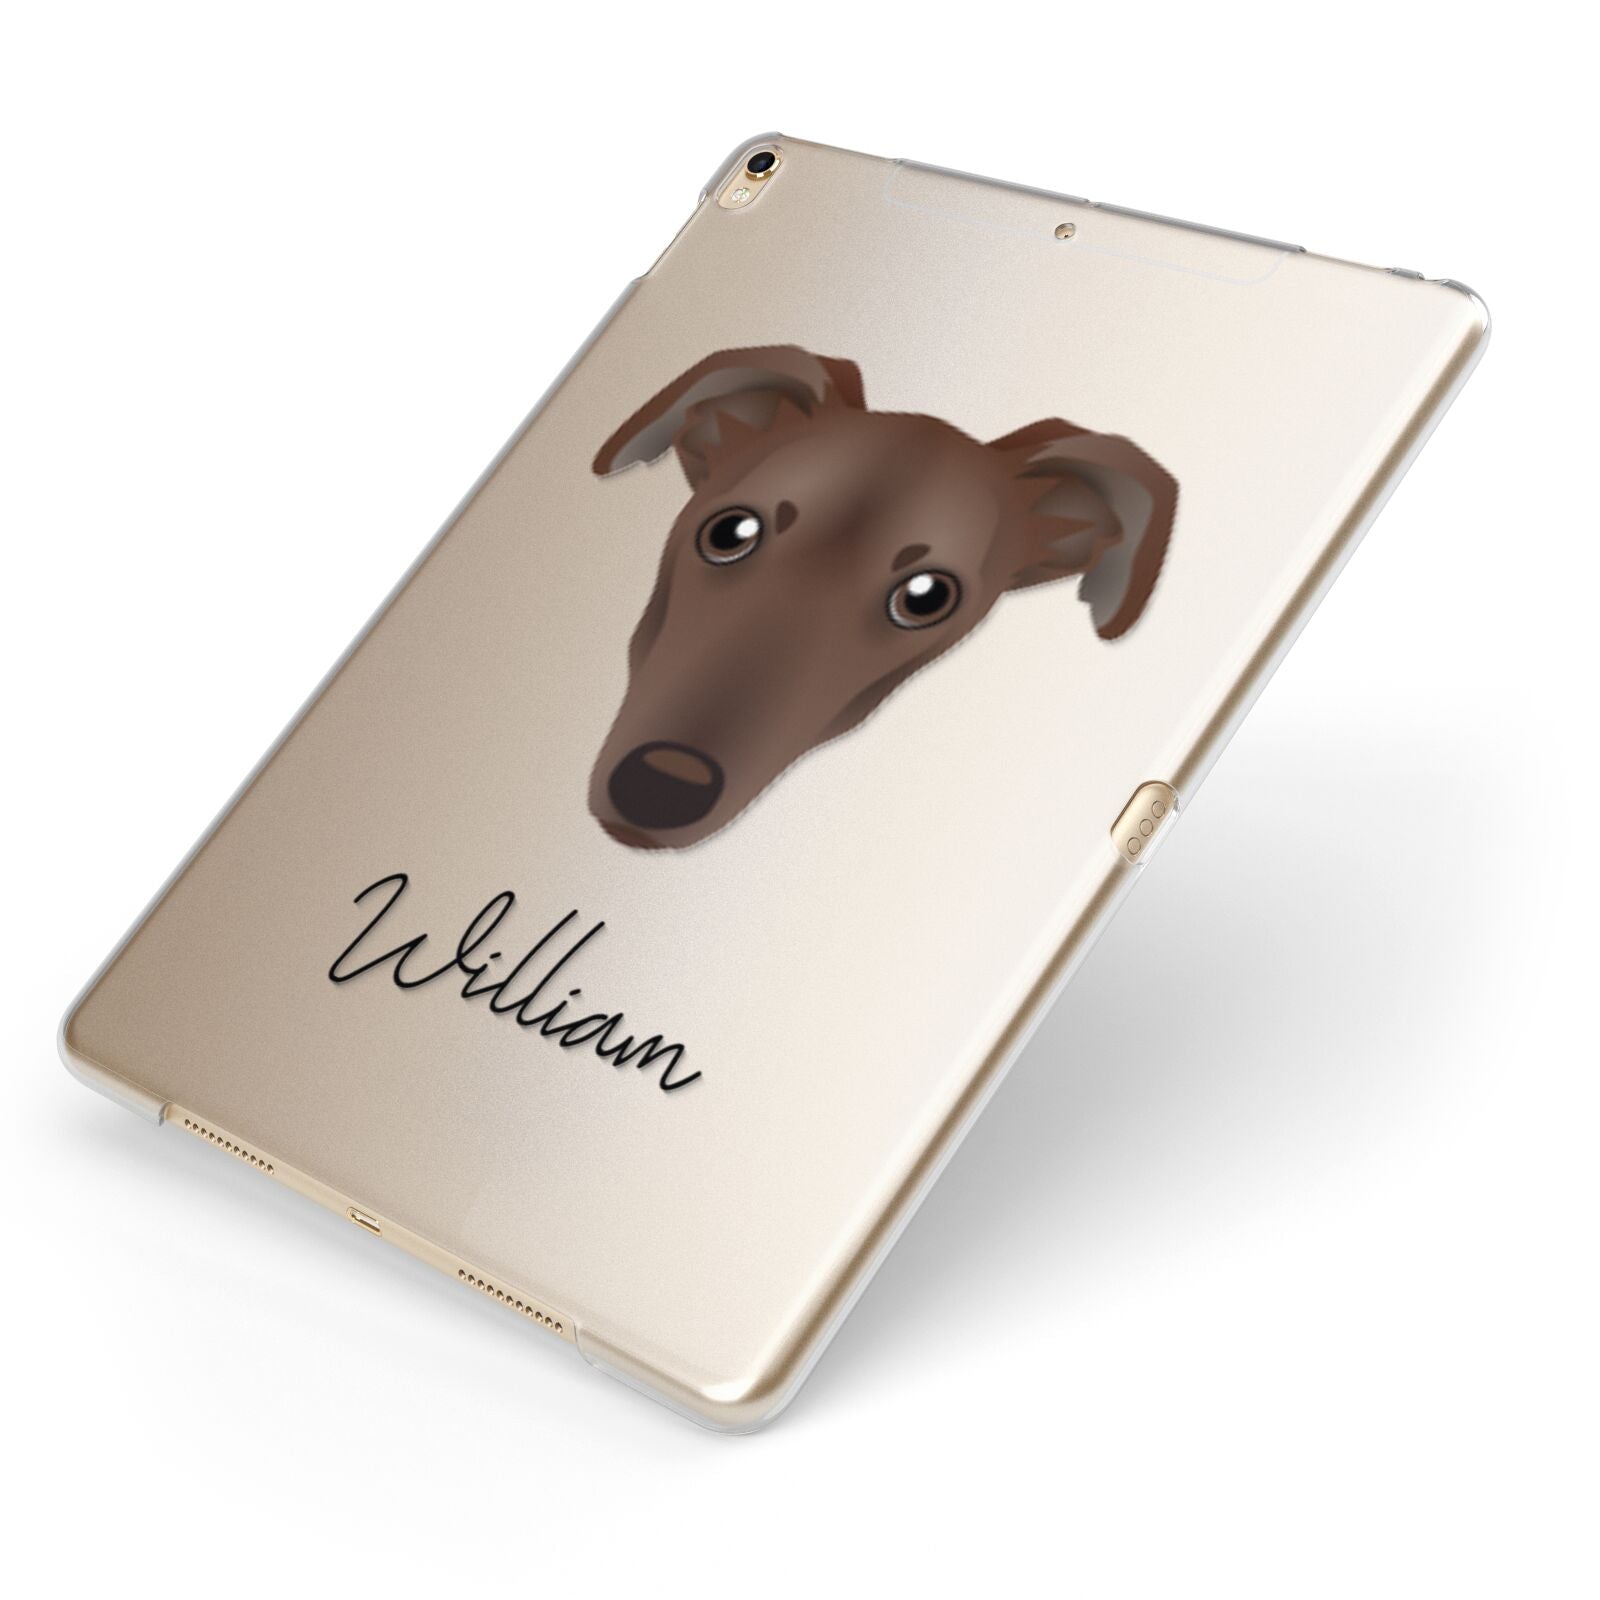 Lurcher Personalised Apple iPad Case on Gold iPad Side View